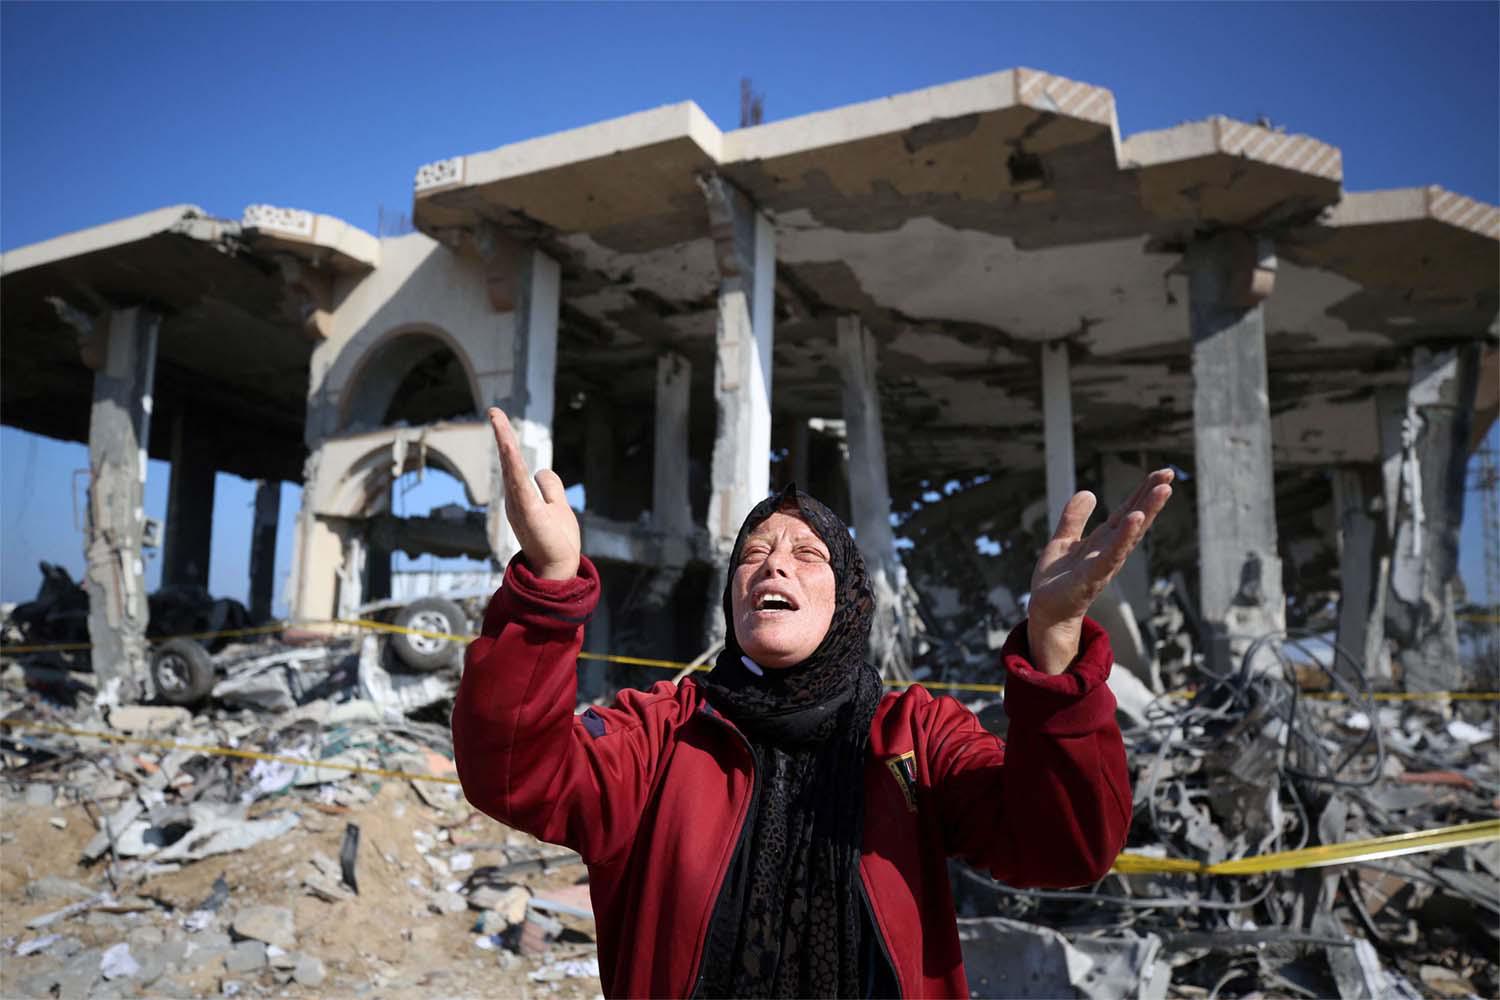 The war has driven most of Gaza's 2.3 million people from their homes